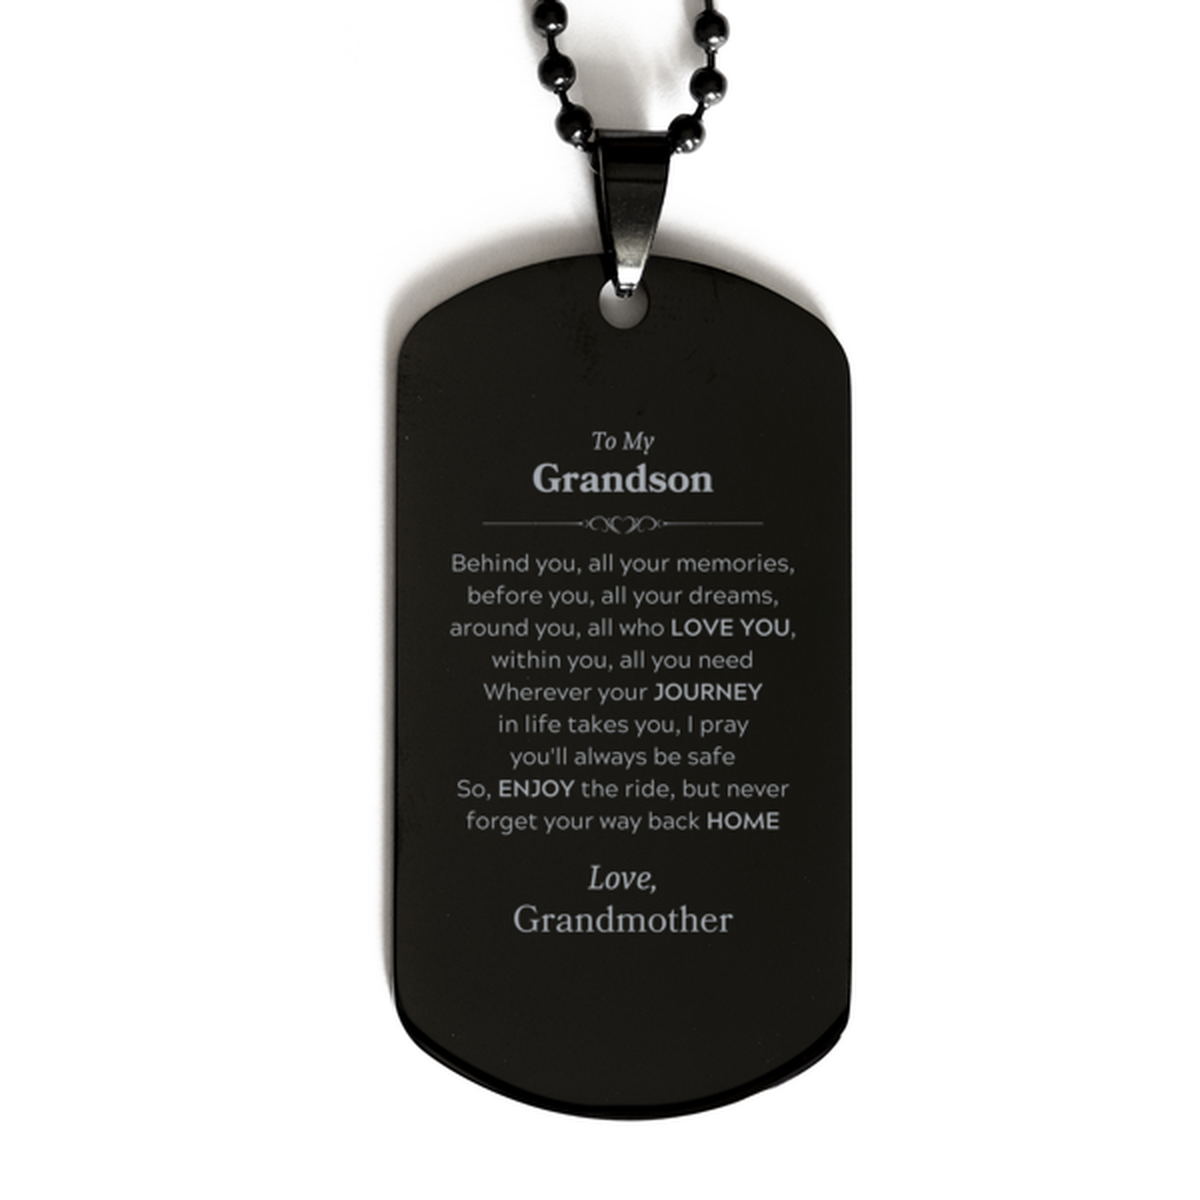 To My Grandson Graduation Gifts from Grandmother, Grandson Black Dog Tag Christmas Birthday Gifts for Grandson Behind you, all your memories, before you, all your dreams. Love, Grandmother